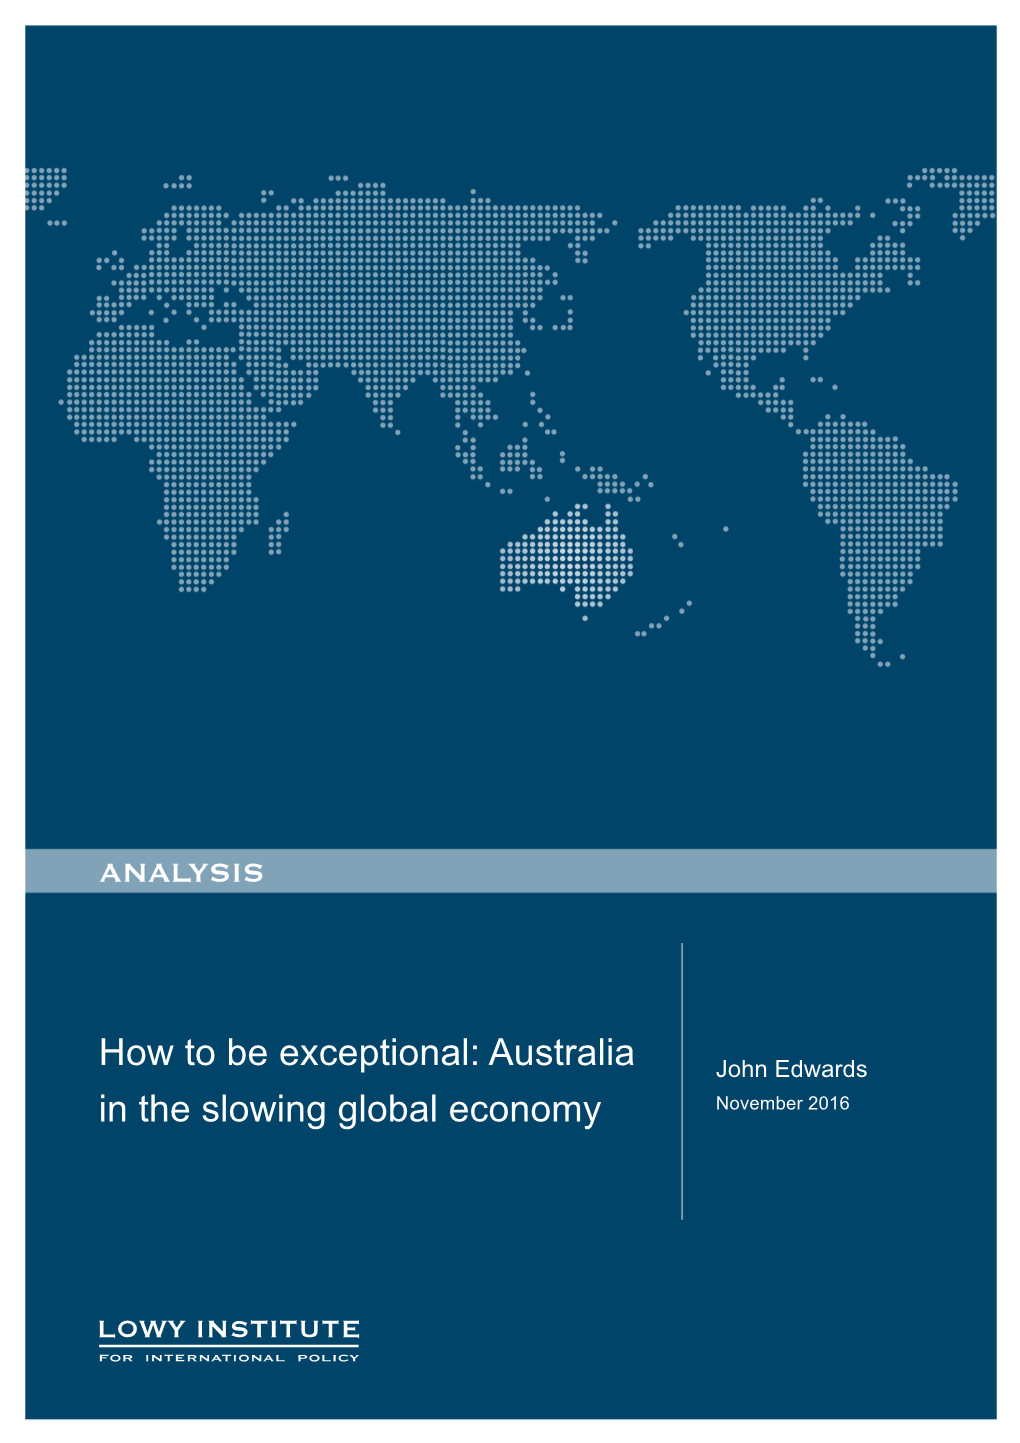 How to Be Exceptional: Australia in the Slowing Global Economy